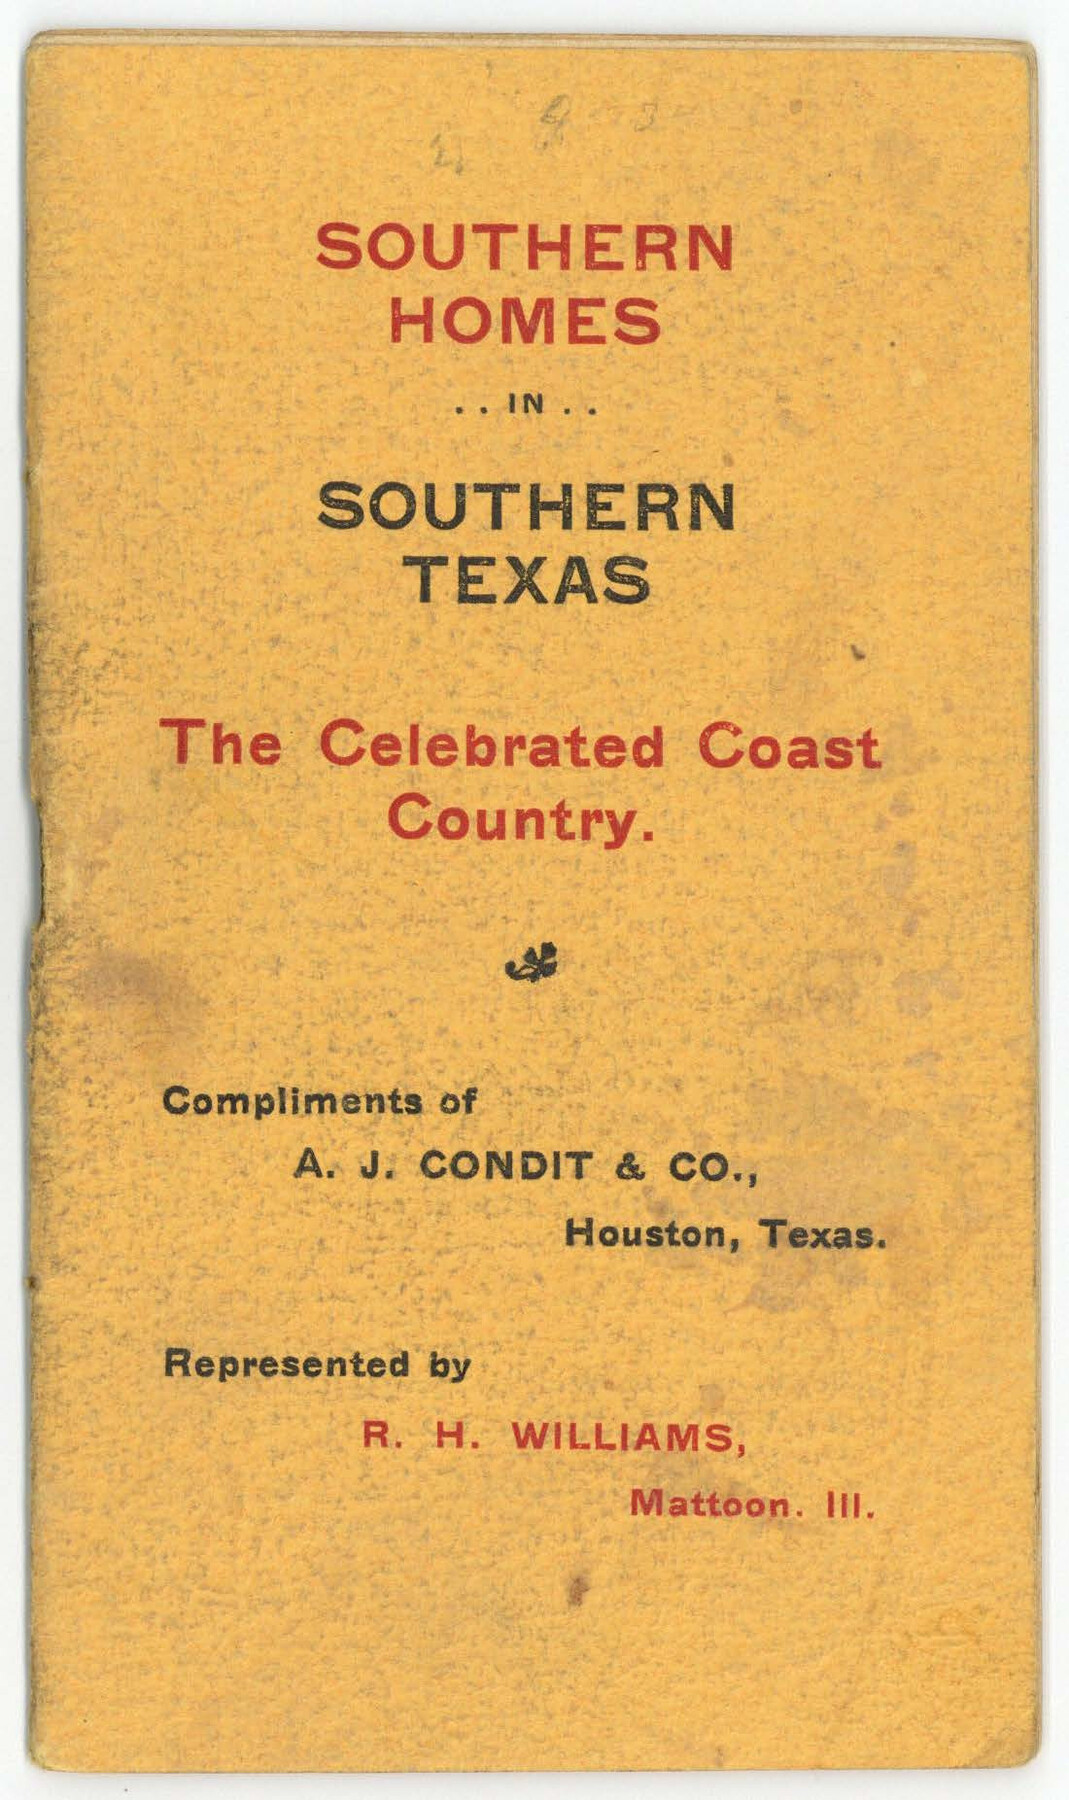 97050, Southern Homes in Southern Texas, The Celebrated Coast Country